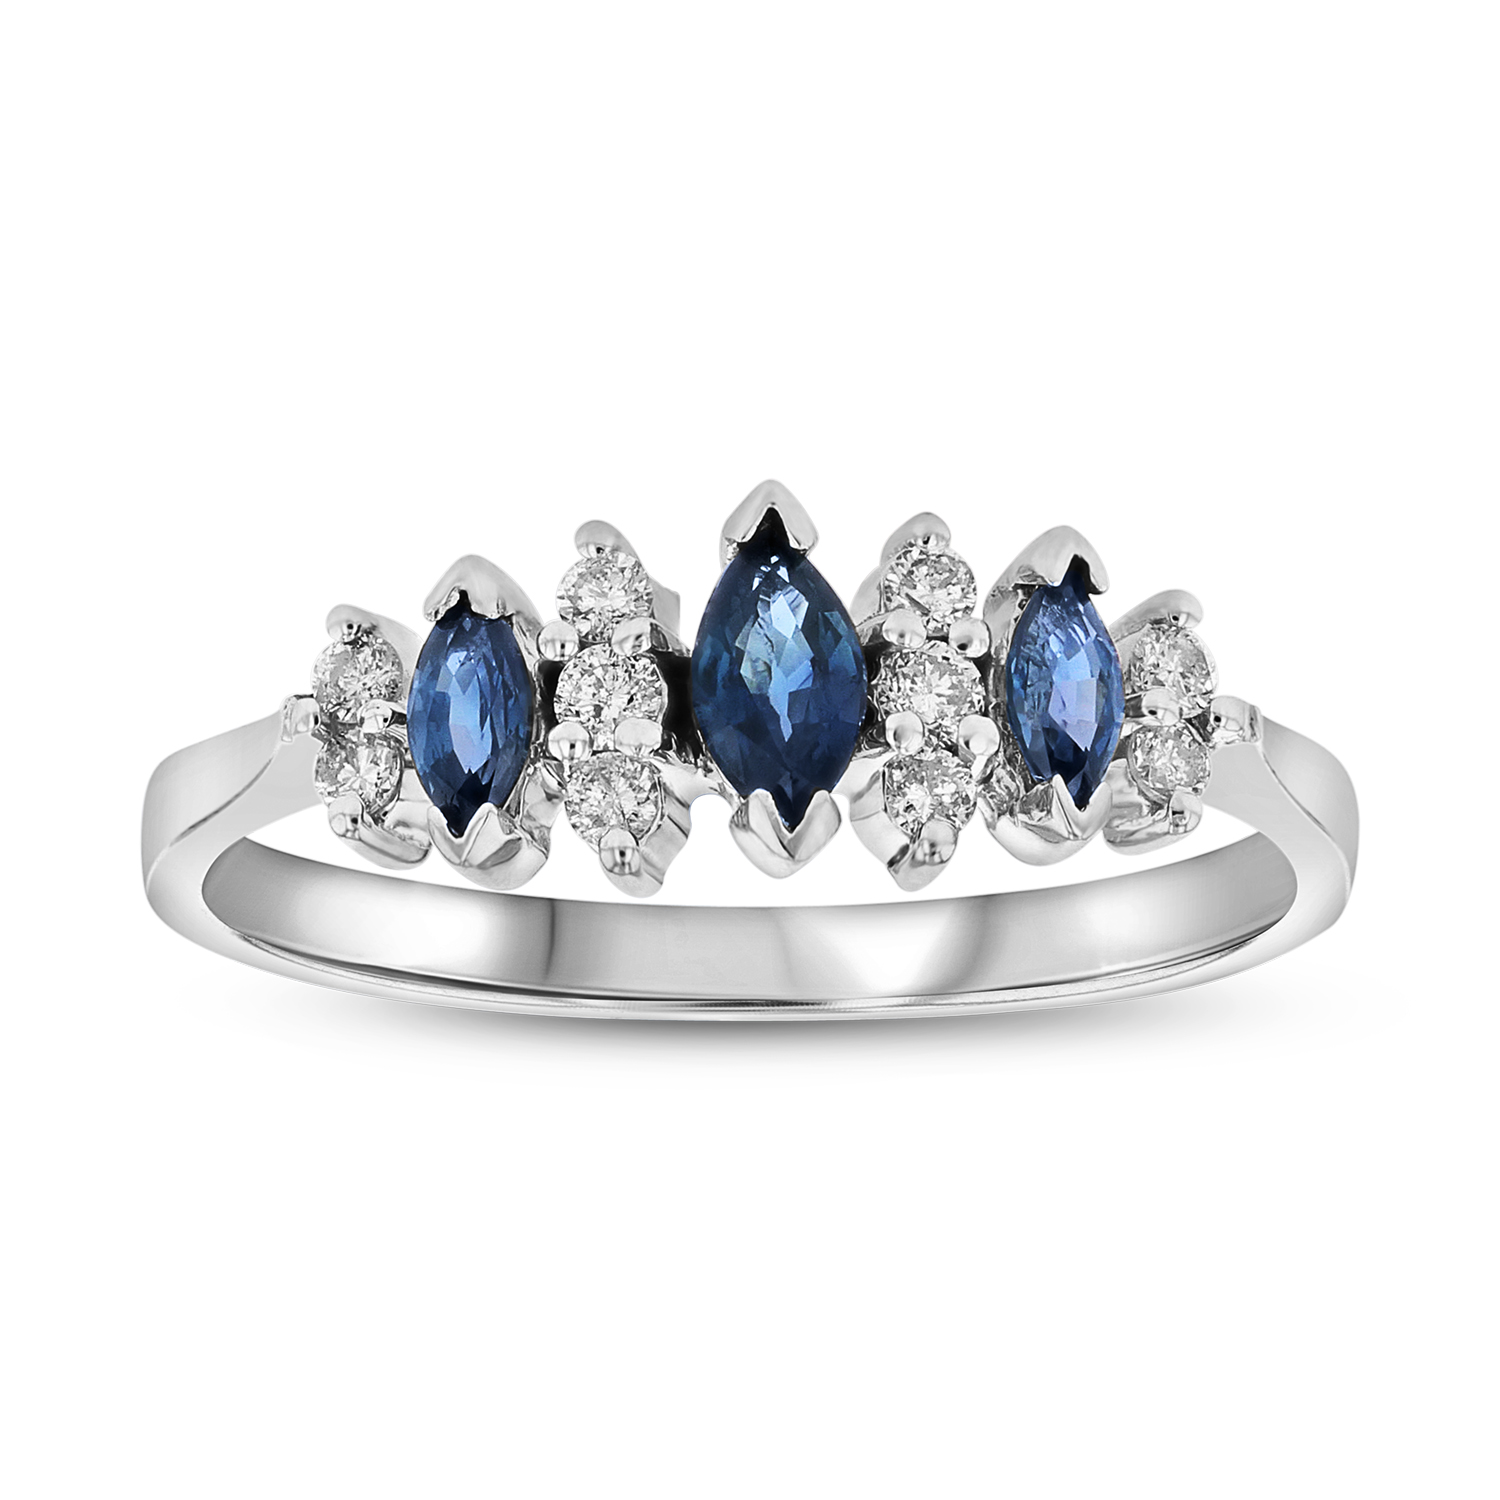 0.15ctw Diamond and Marquis Sapphire Ring in 14k Gold